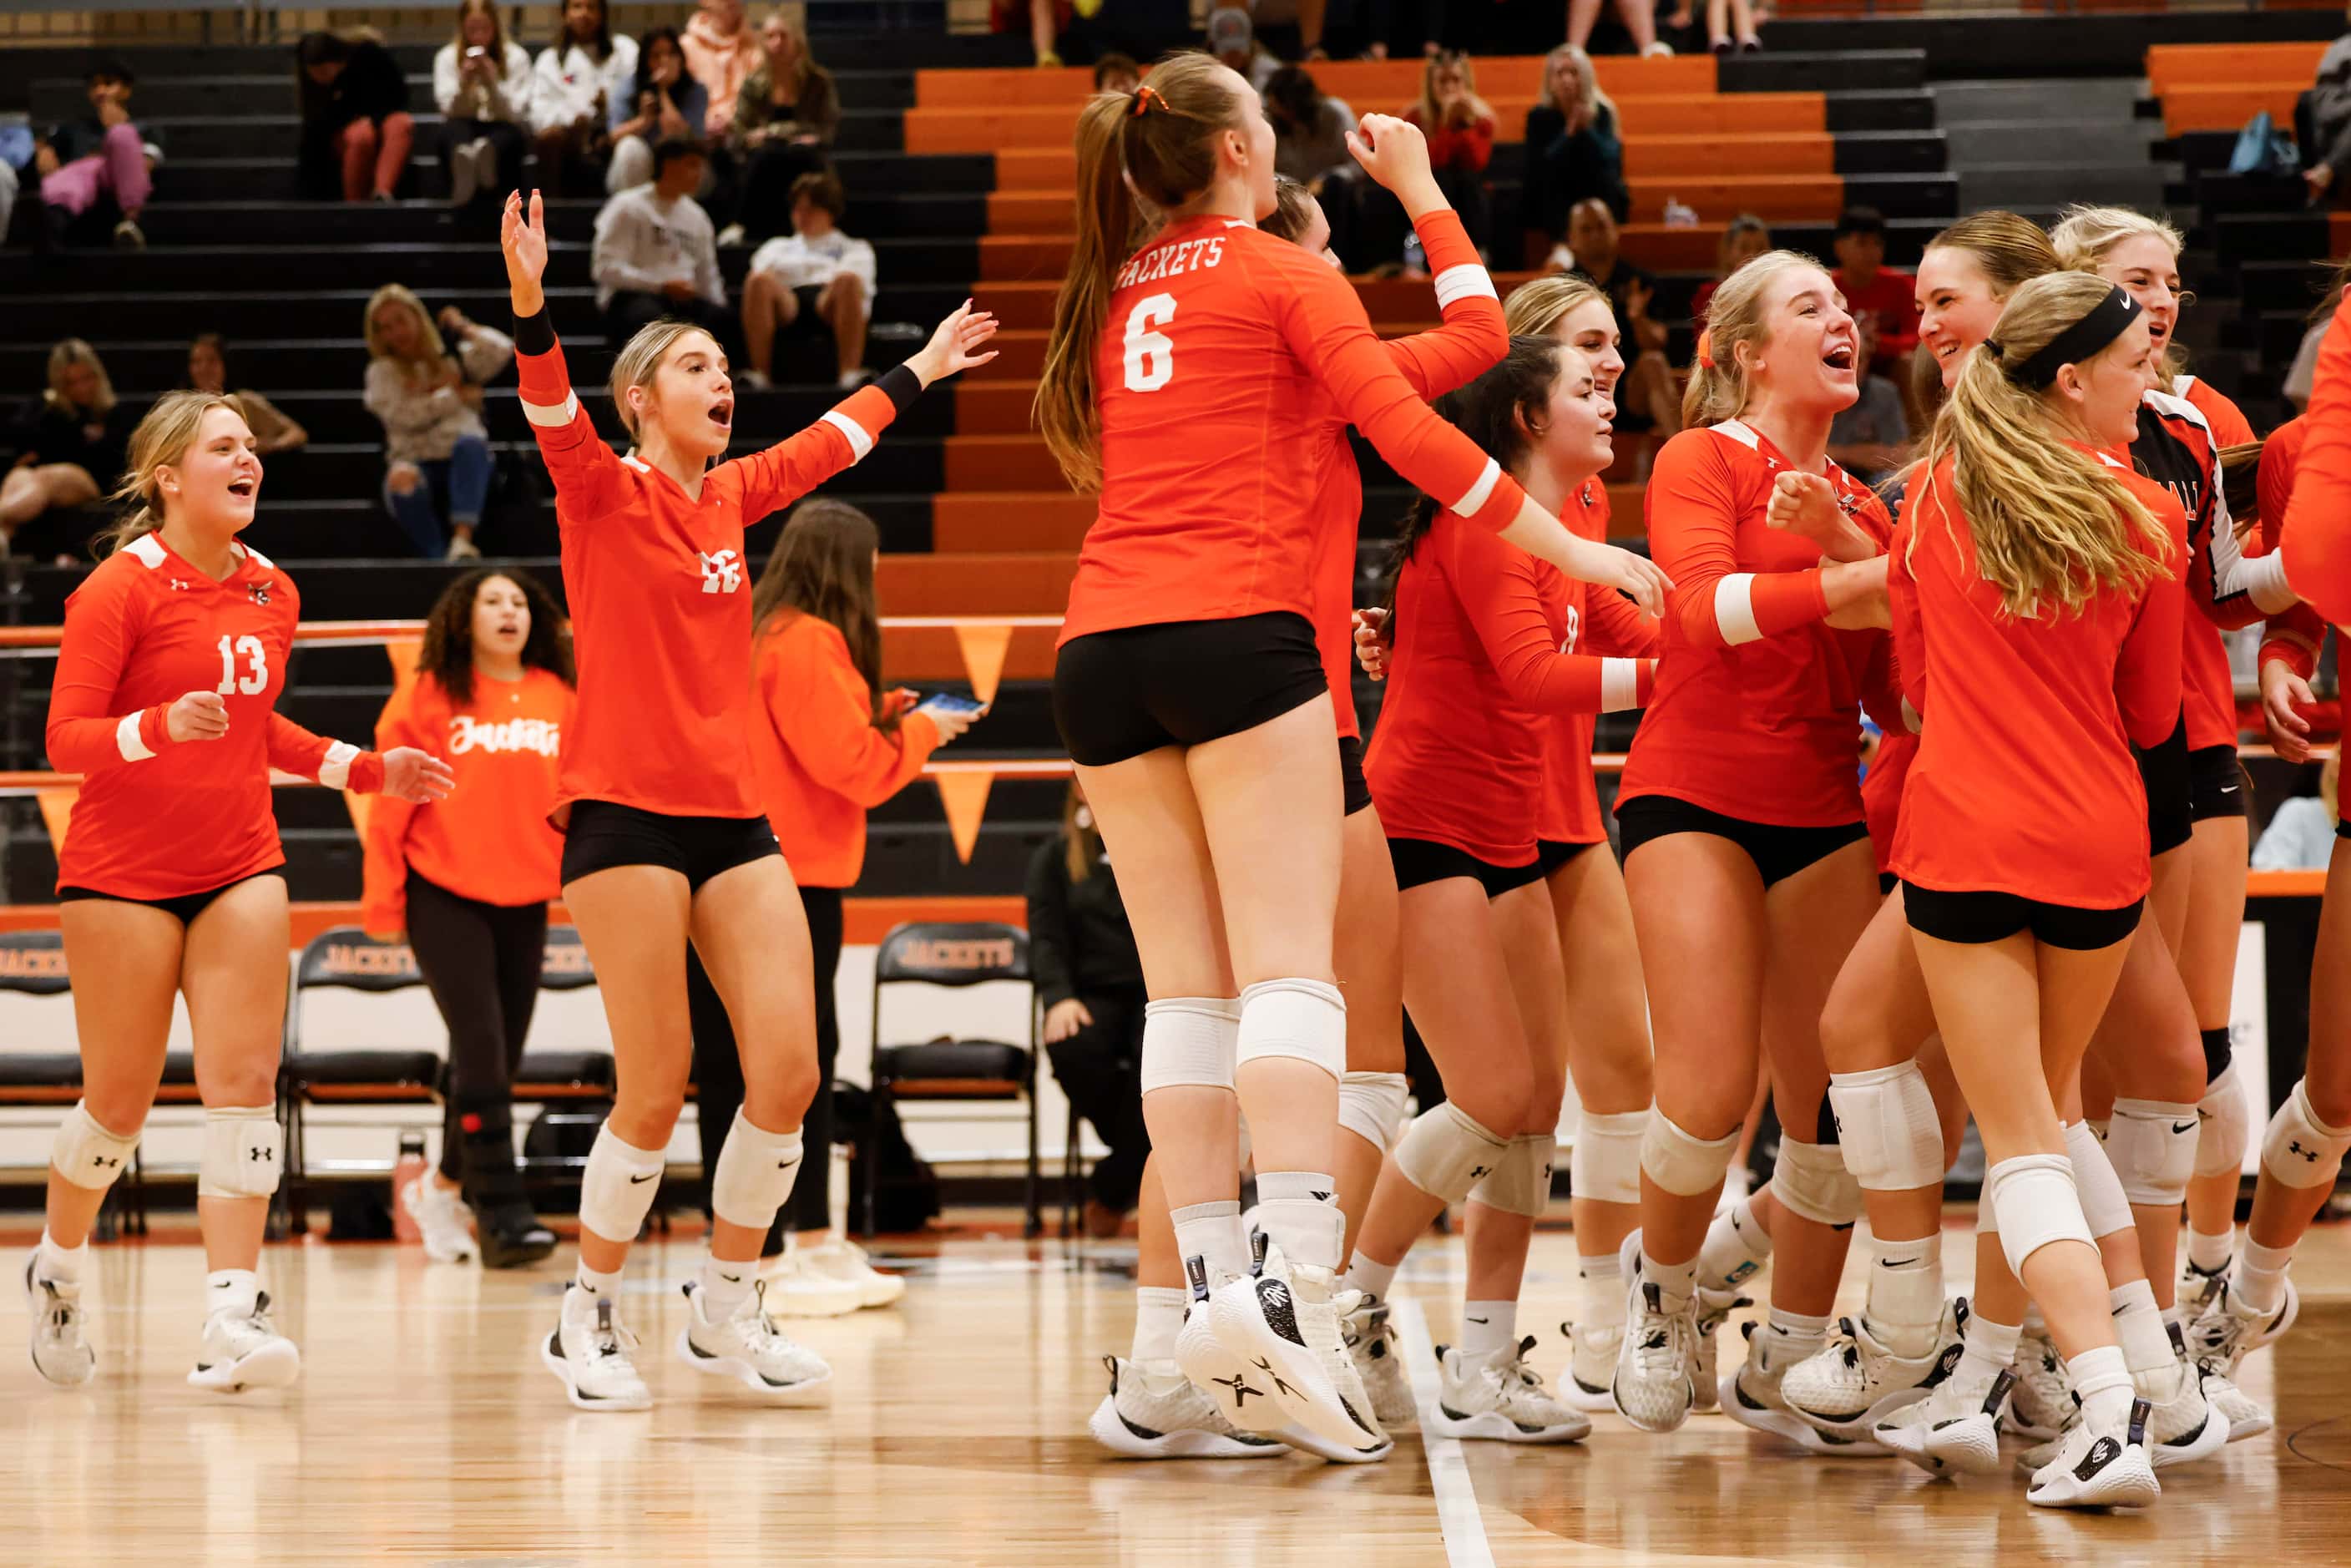 Rockwall high players celebrate after winning against Rockwell Heath during a volleyball...